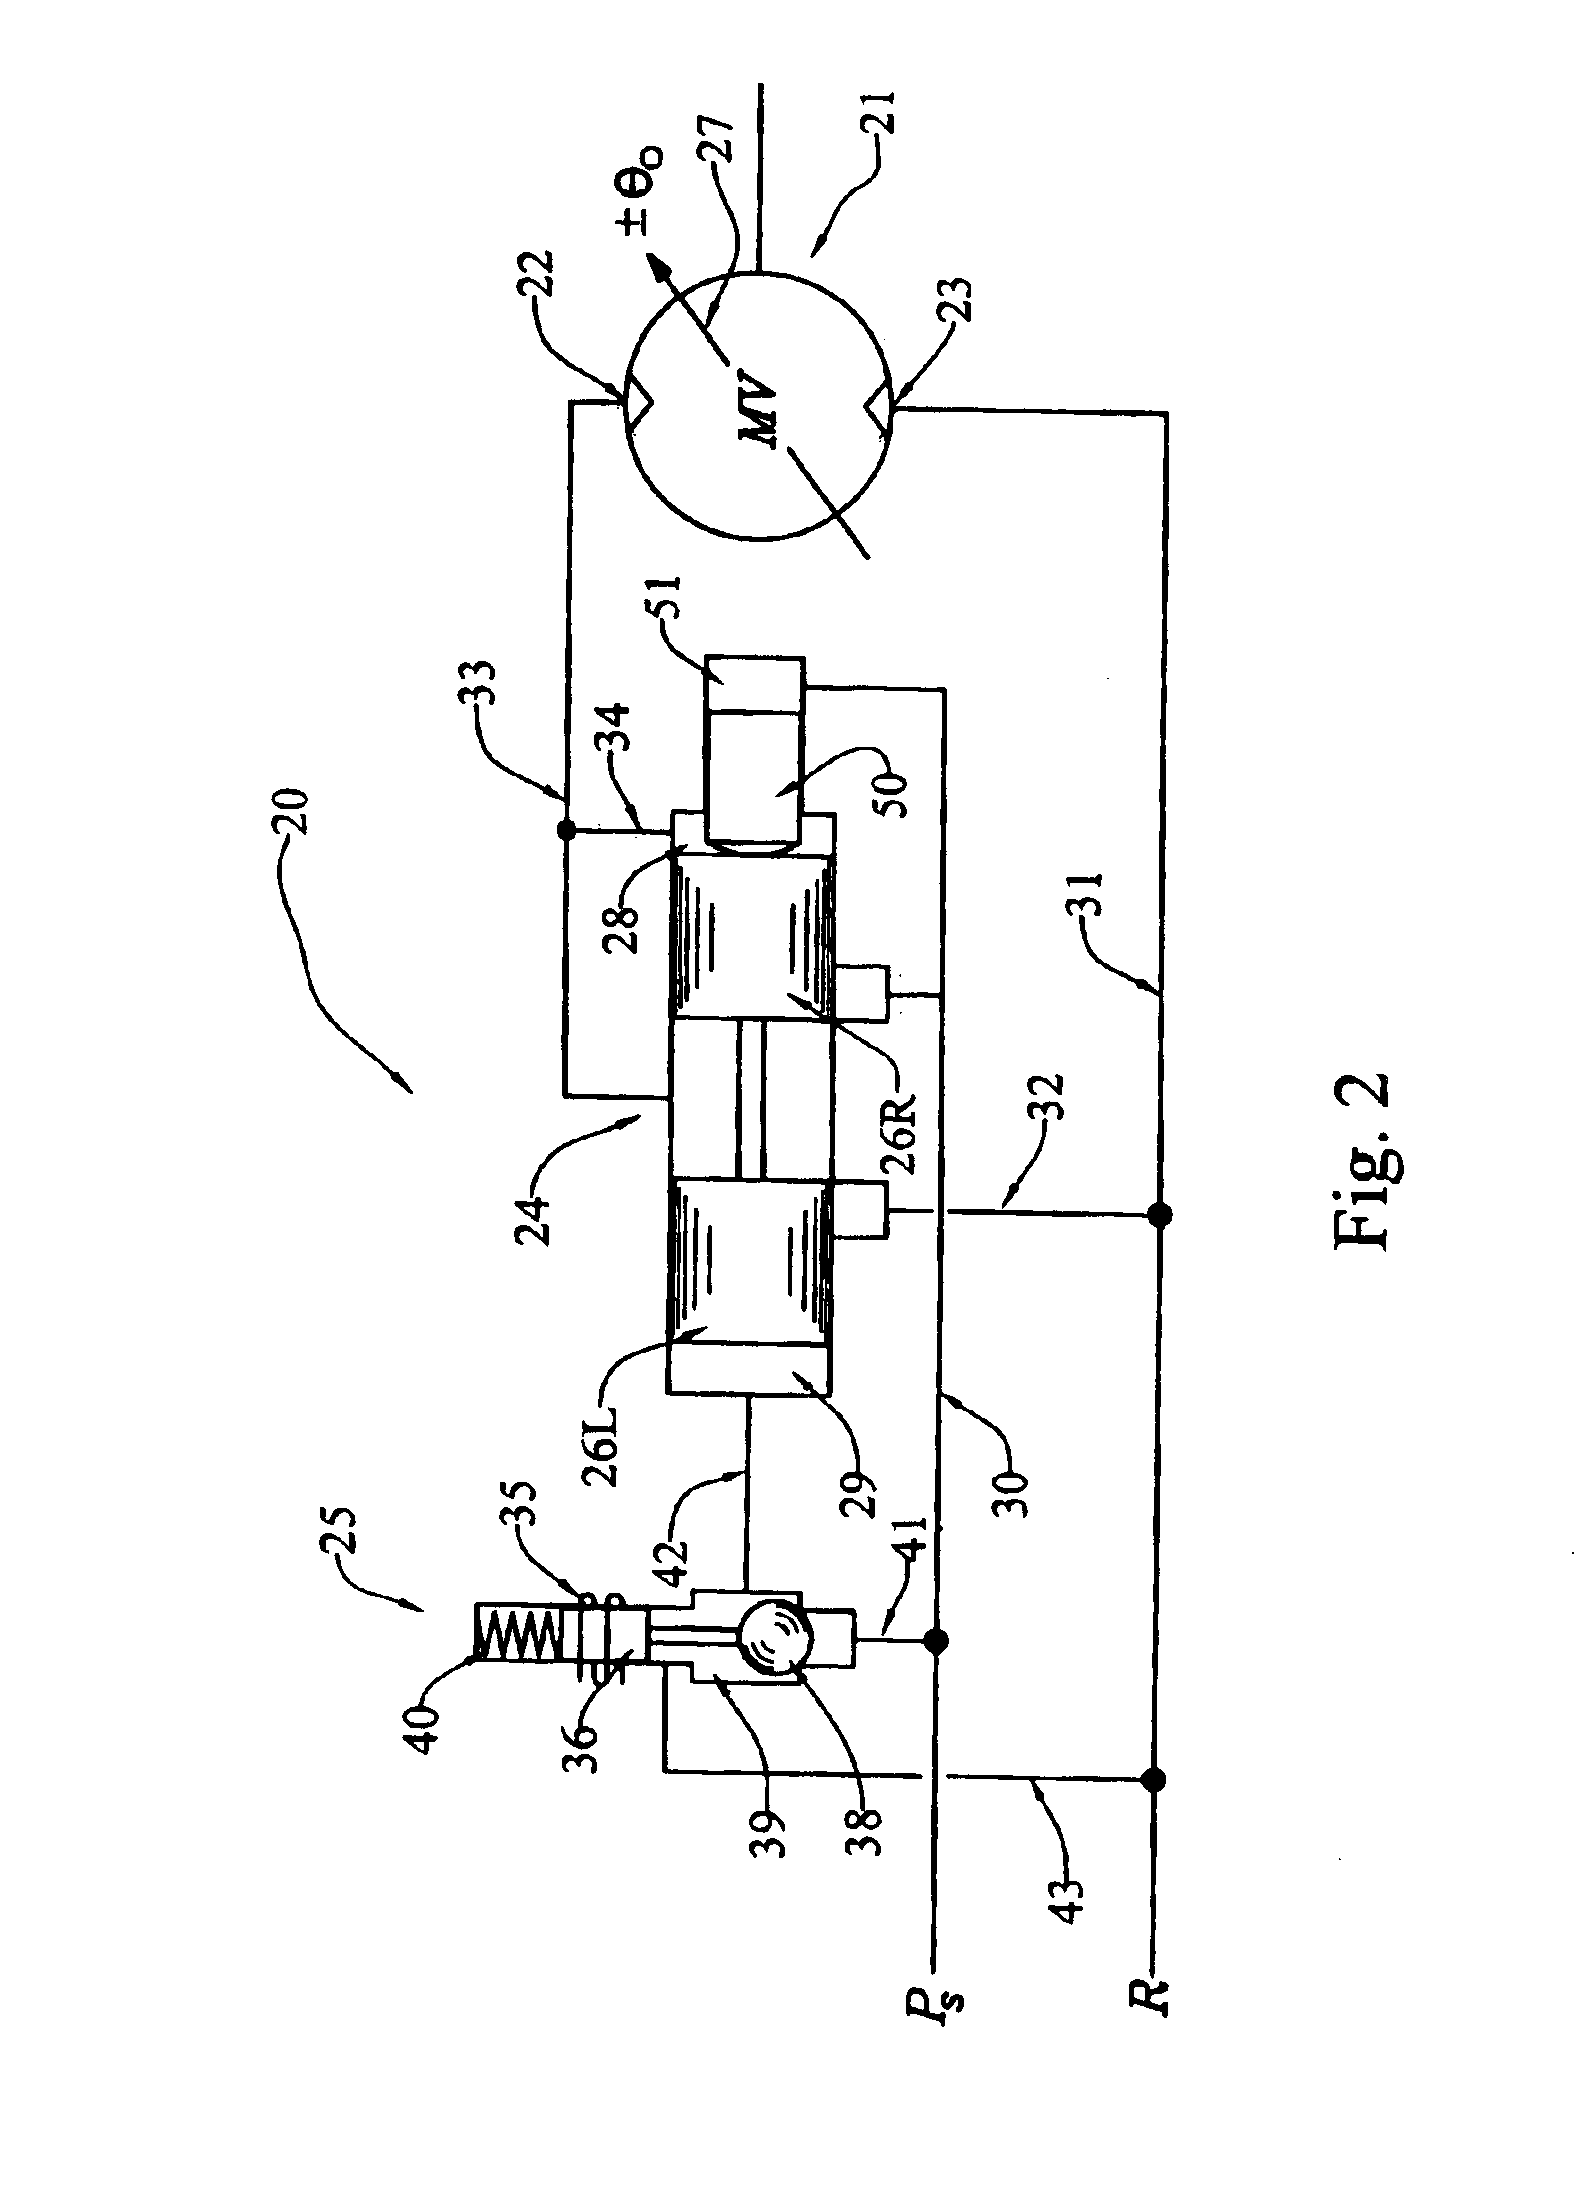 Regulated pressure supply for a variable-displacement reversible hydraulic motor